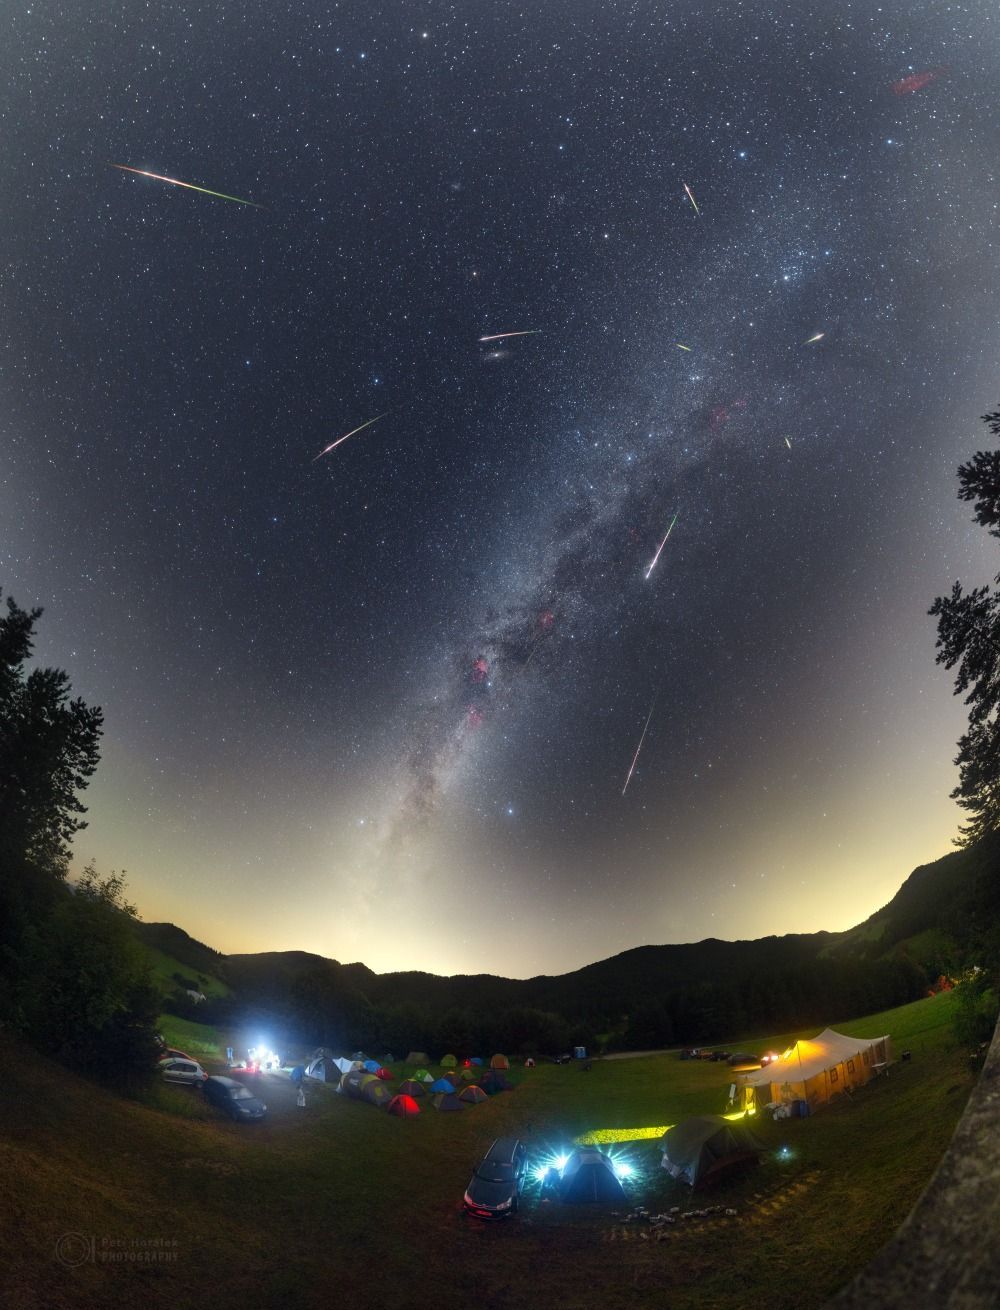 Noc Perseid - Astronomy Picture Of the Day - NASA